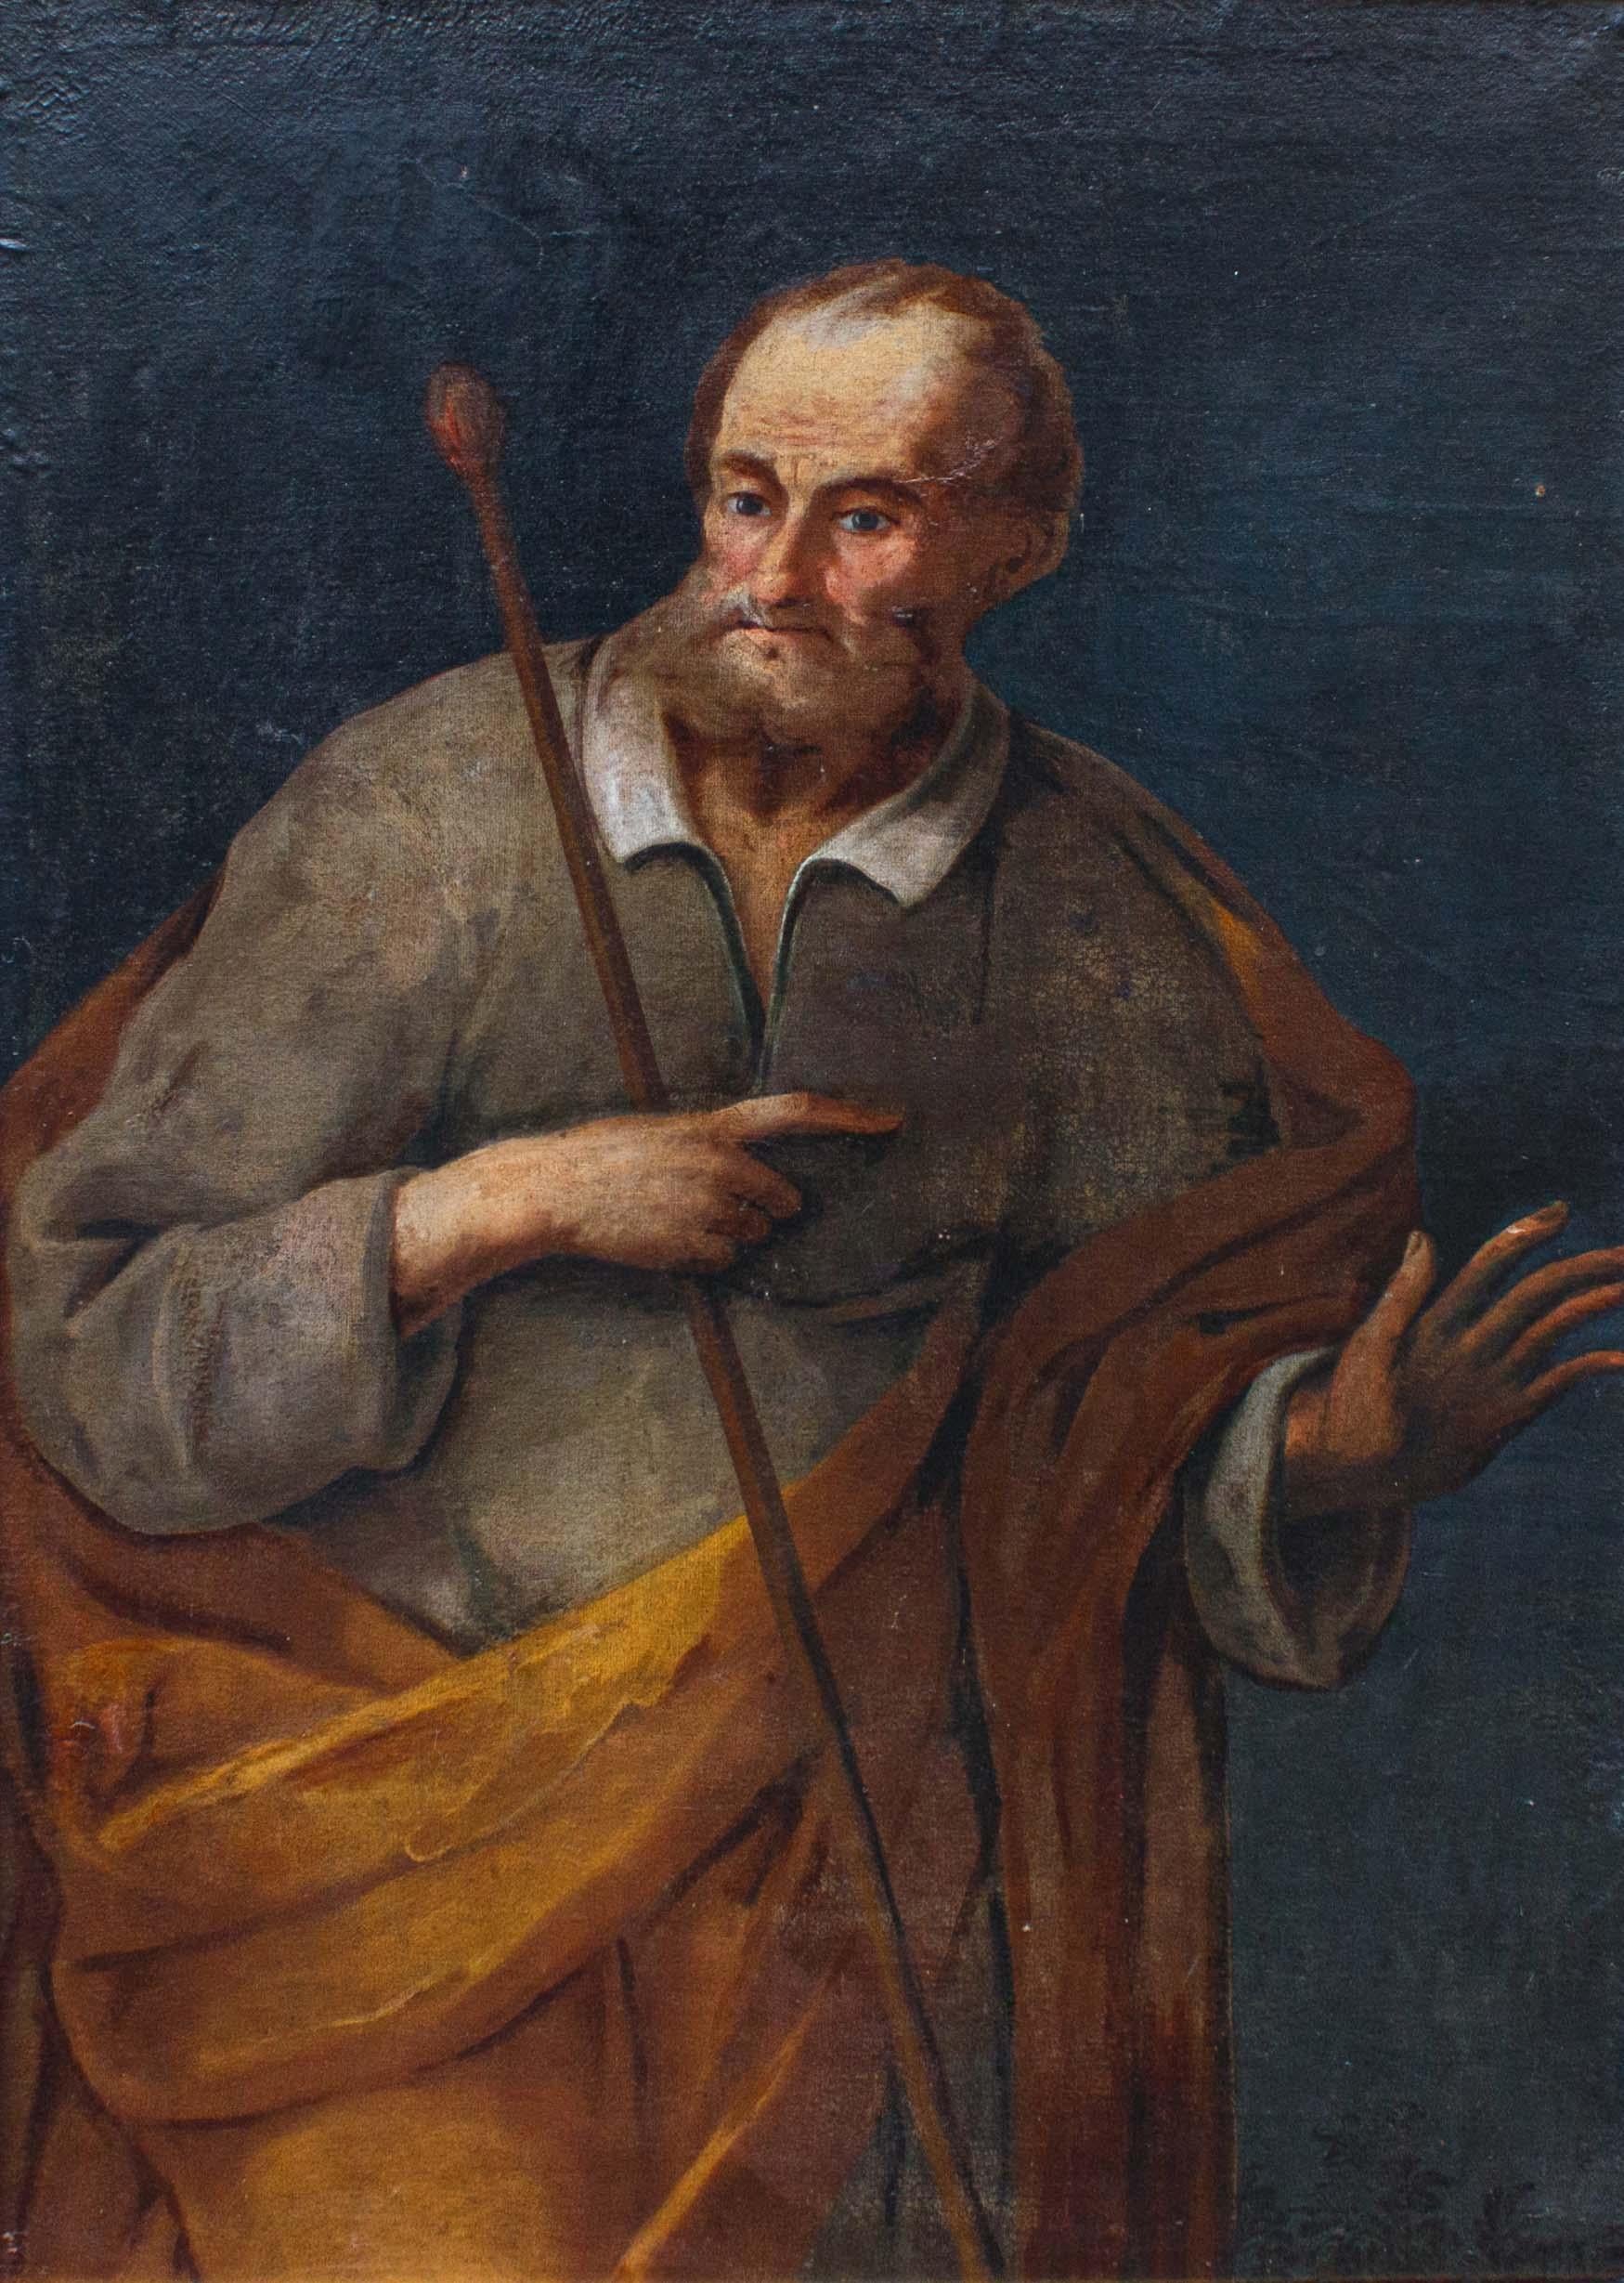 Antonio Cifrondi (1665 - 1730), Attributed

Man with stick - Saint Joseph 

Measures: Oil on canvas, Cm 115 x 79 - With frame, cm 139 x 103

This canvas is, for stylistic and compositional reasons, comparable to the works of the Bergamo